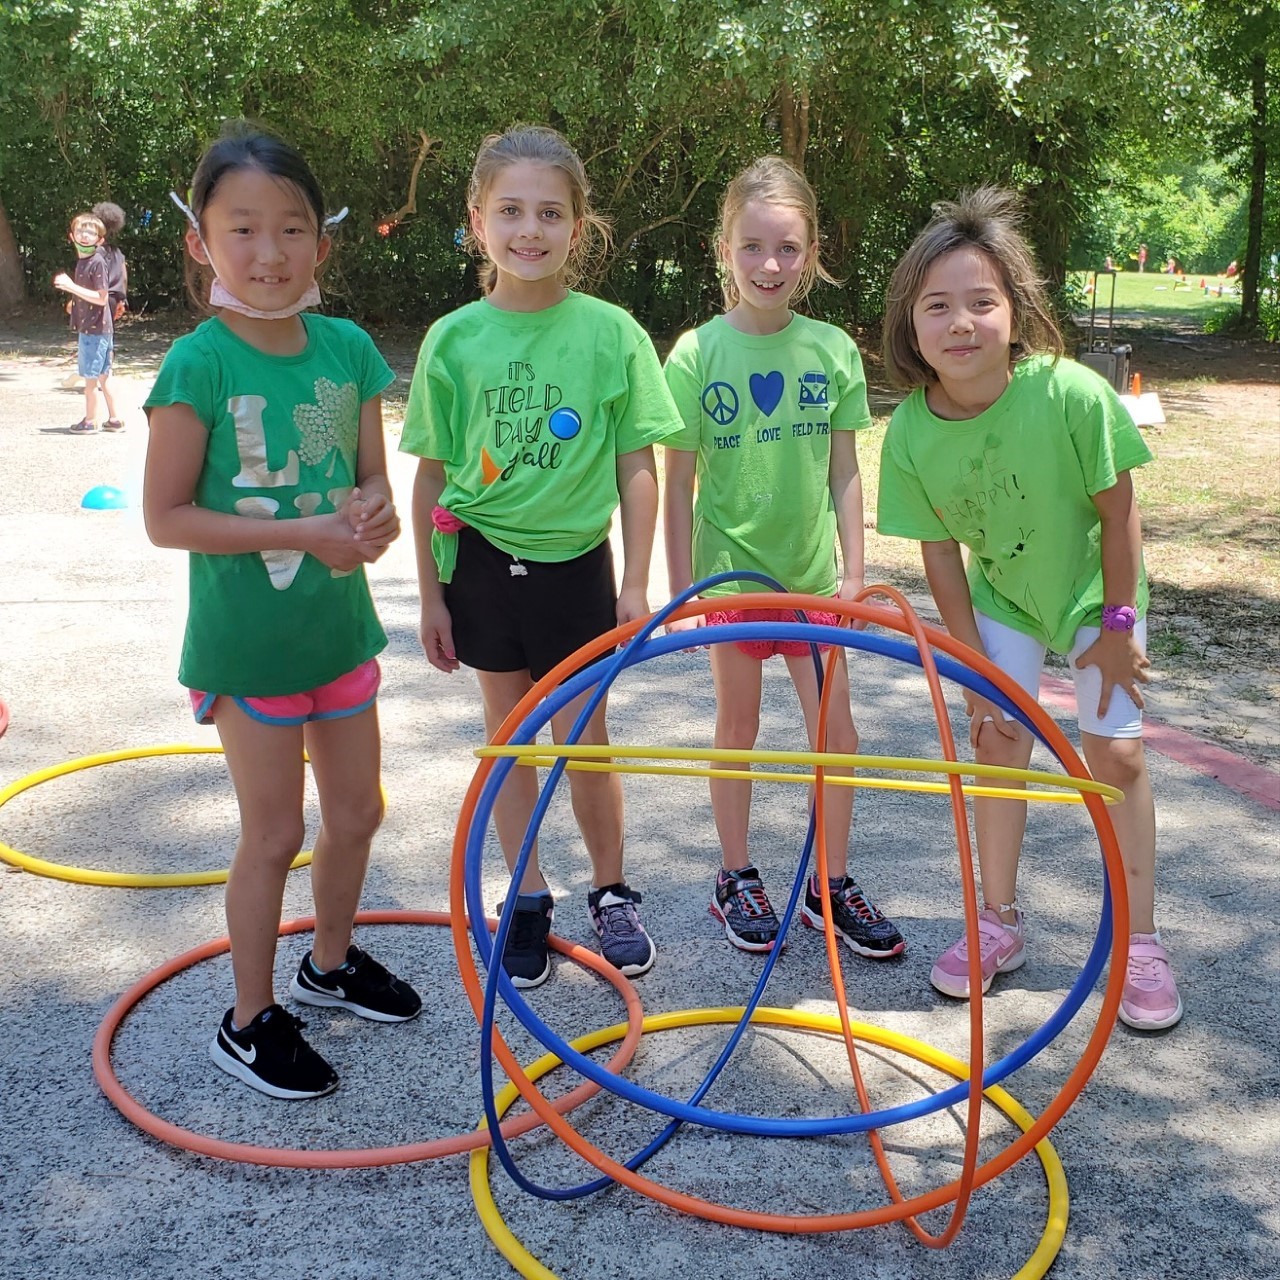 Students complete an activity with hula hoops during field day.